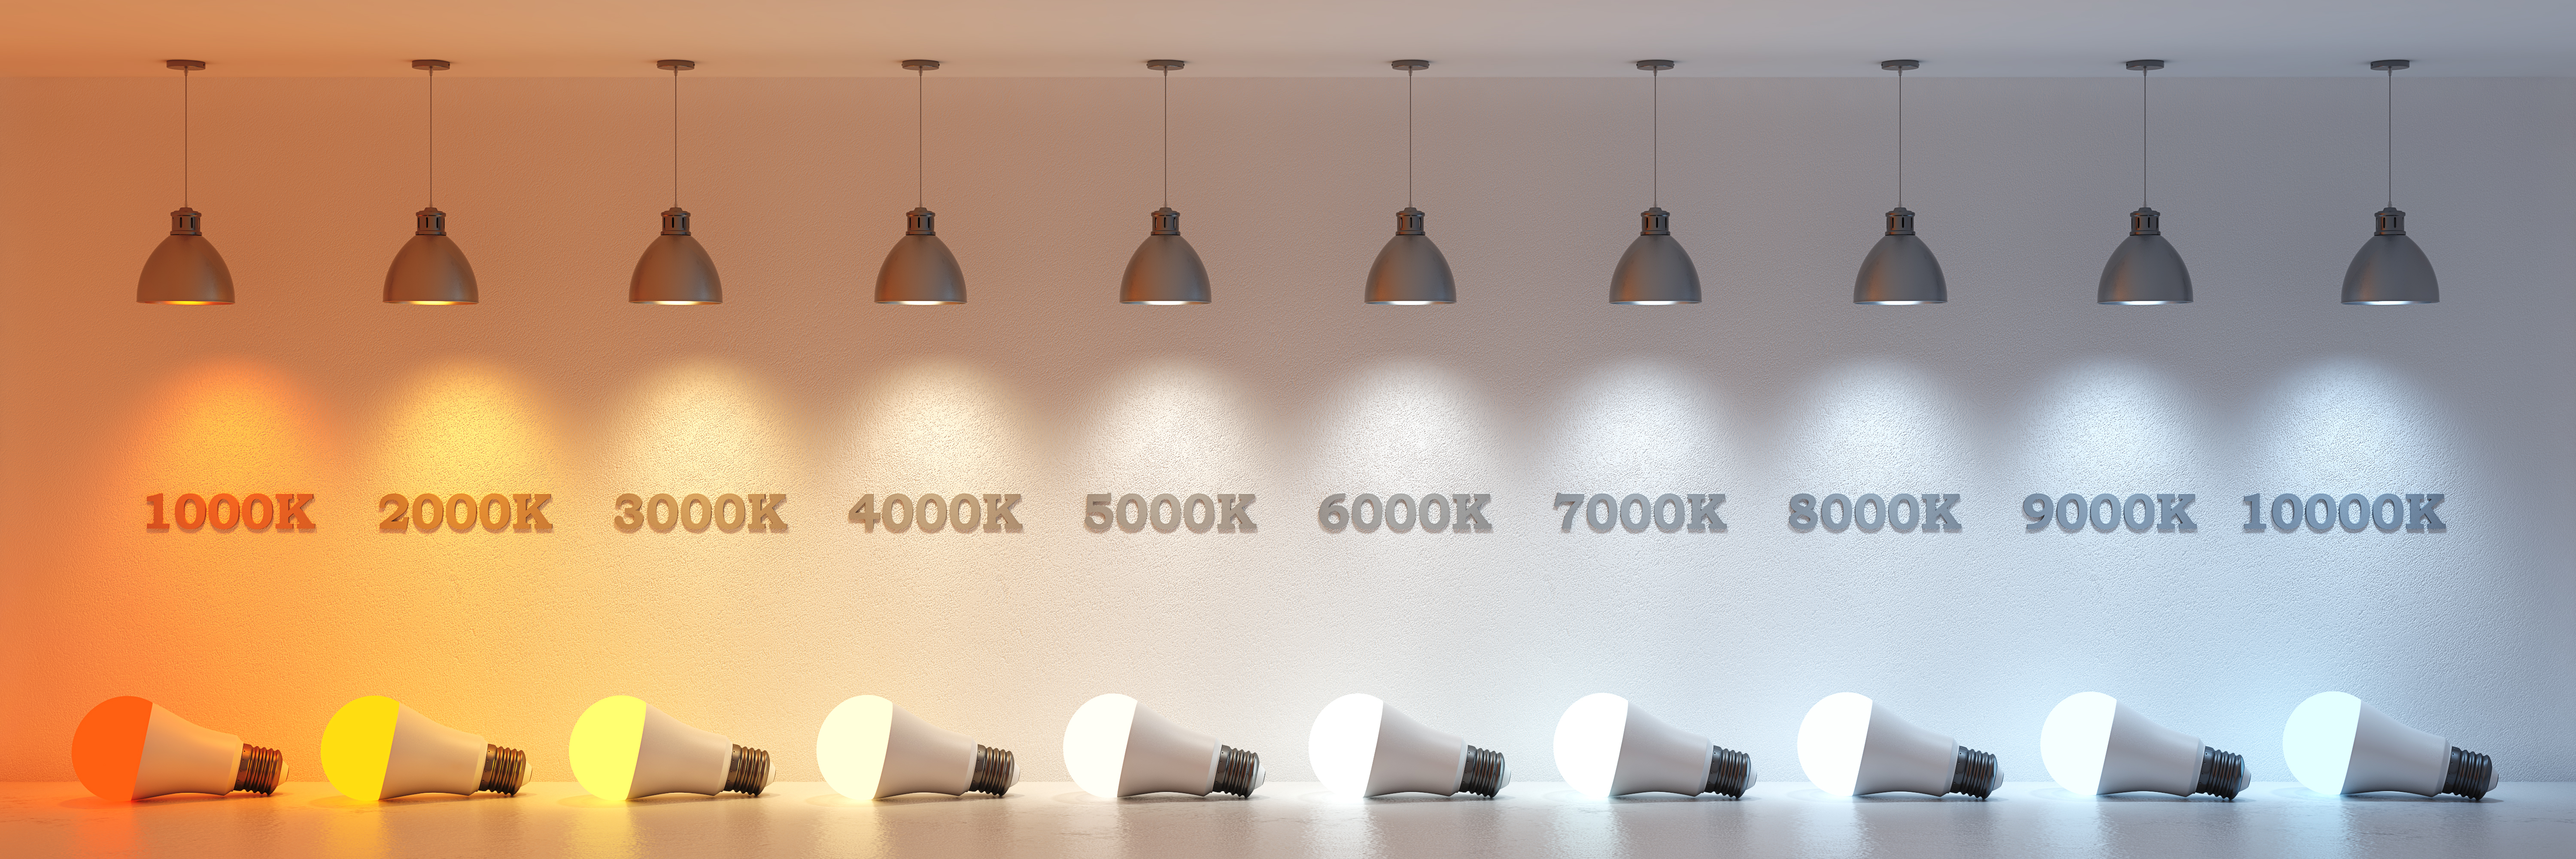 Tips for Choosing LED Lighting Color Temperature